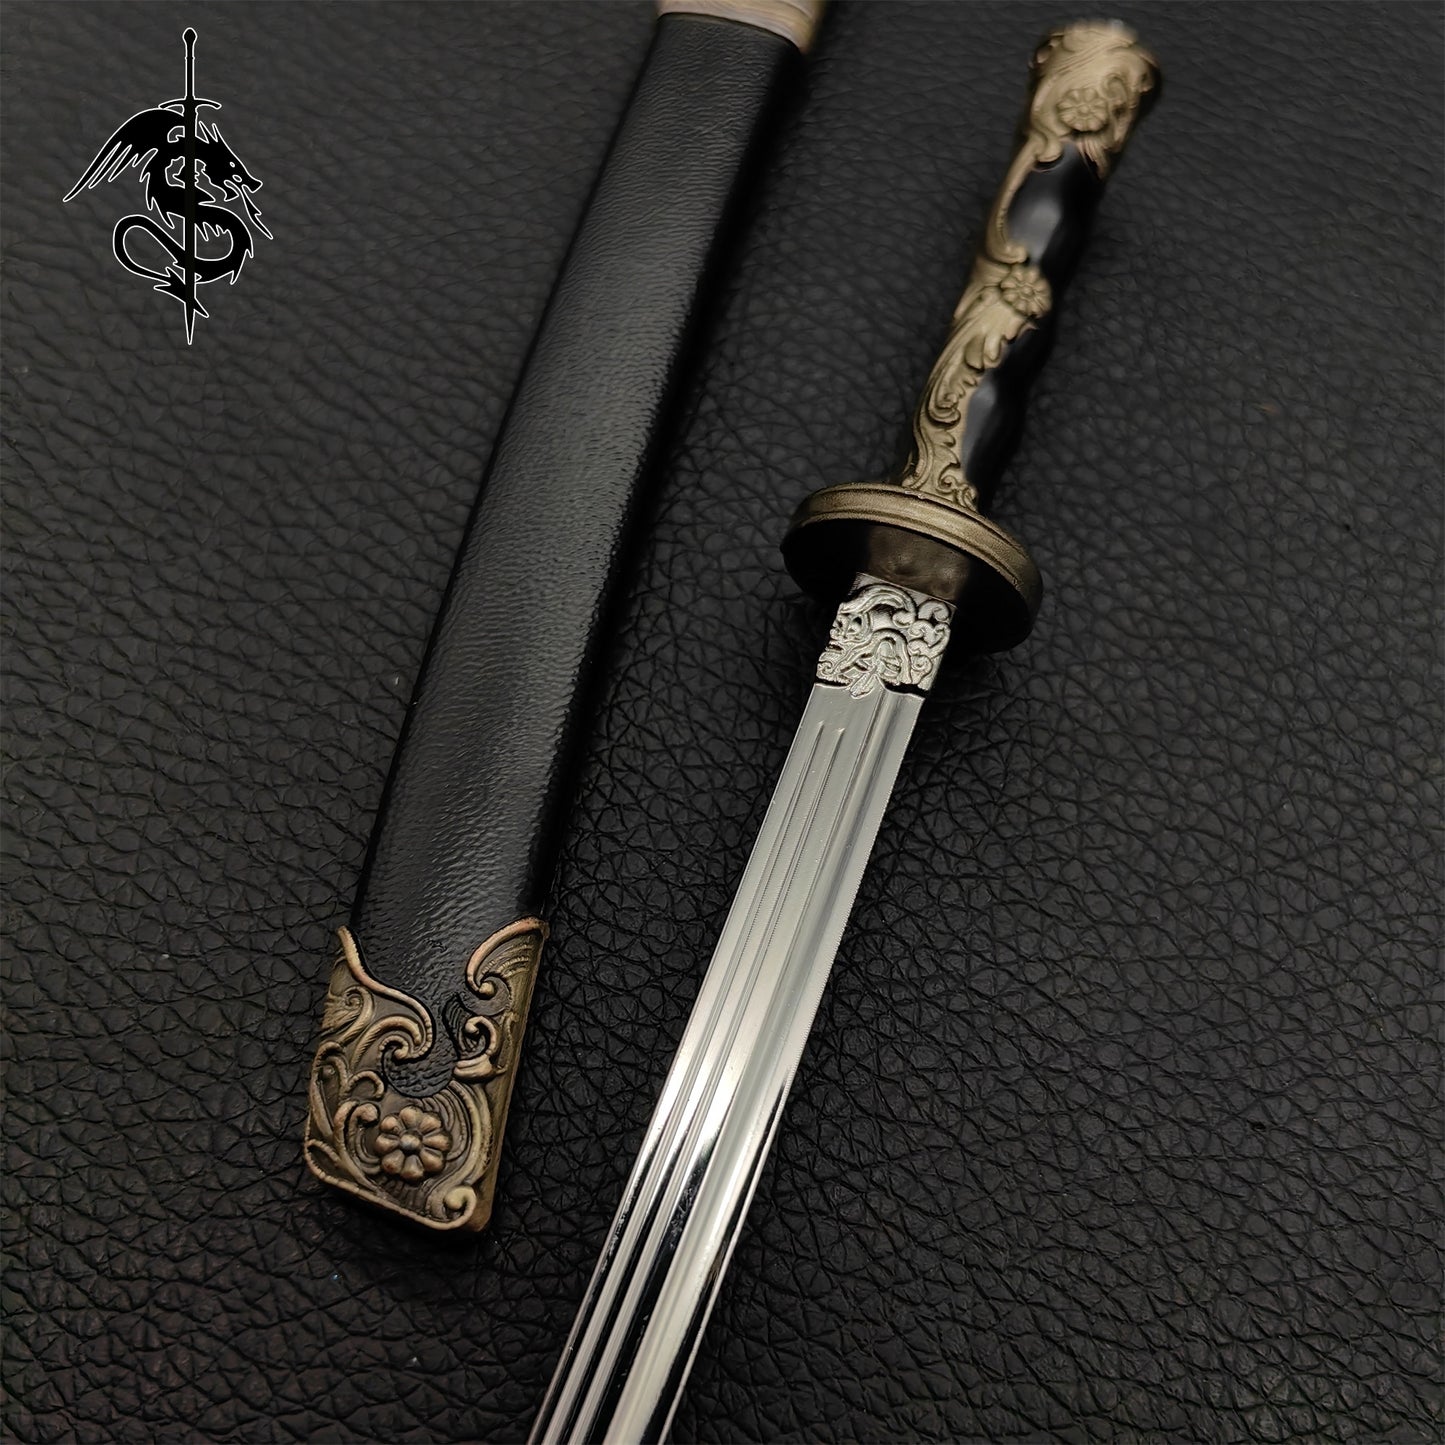 The Imperial Guards Of Ming Dynasty Brotherhood Of Blades Mini Sword